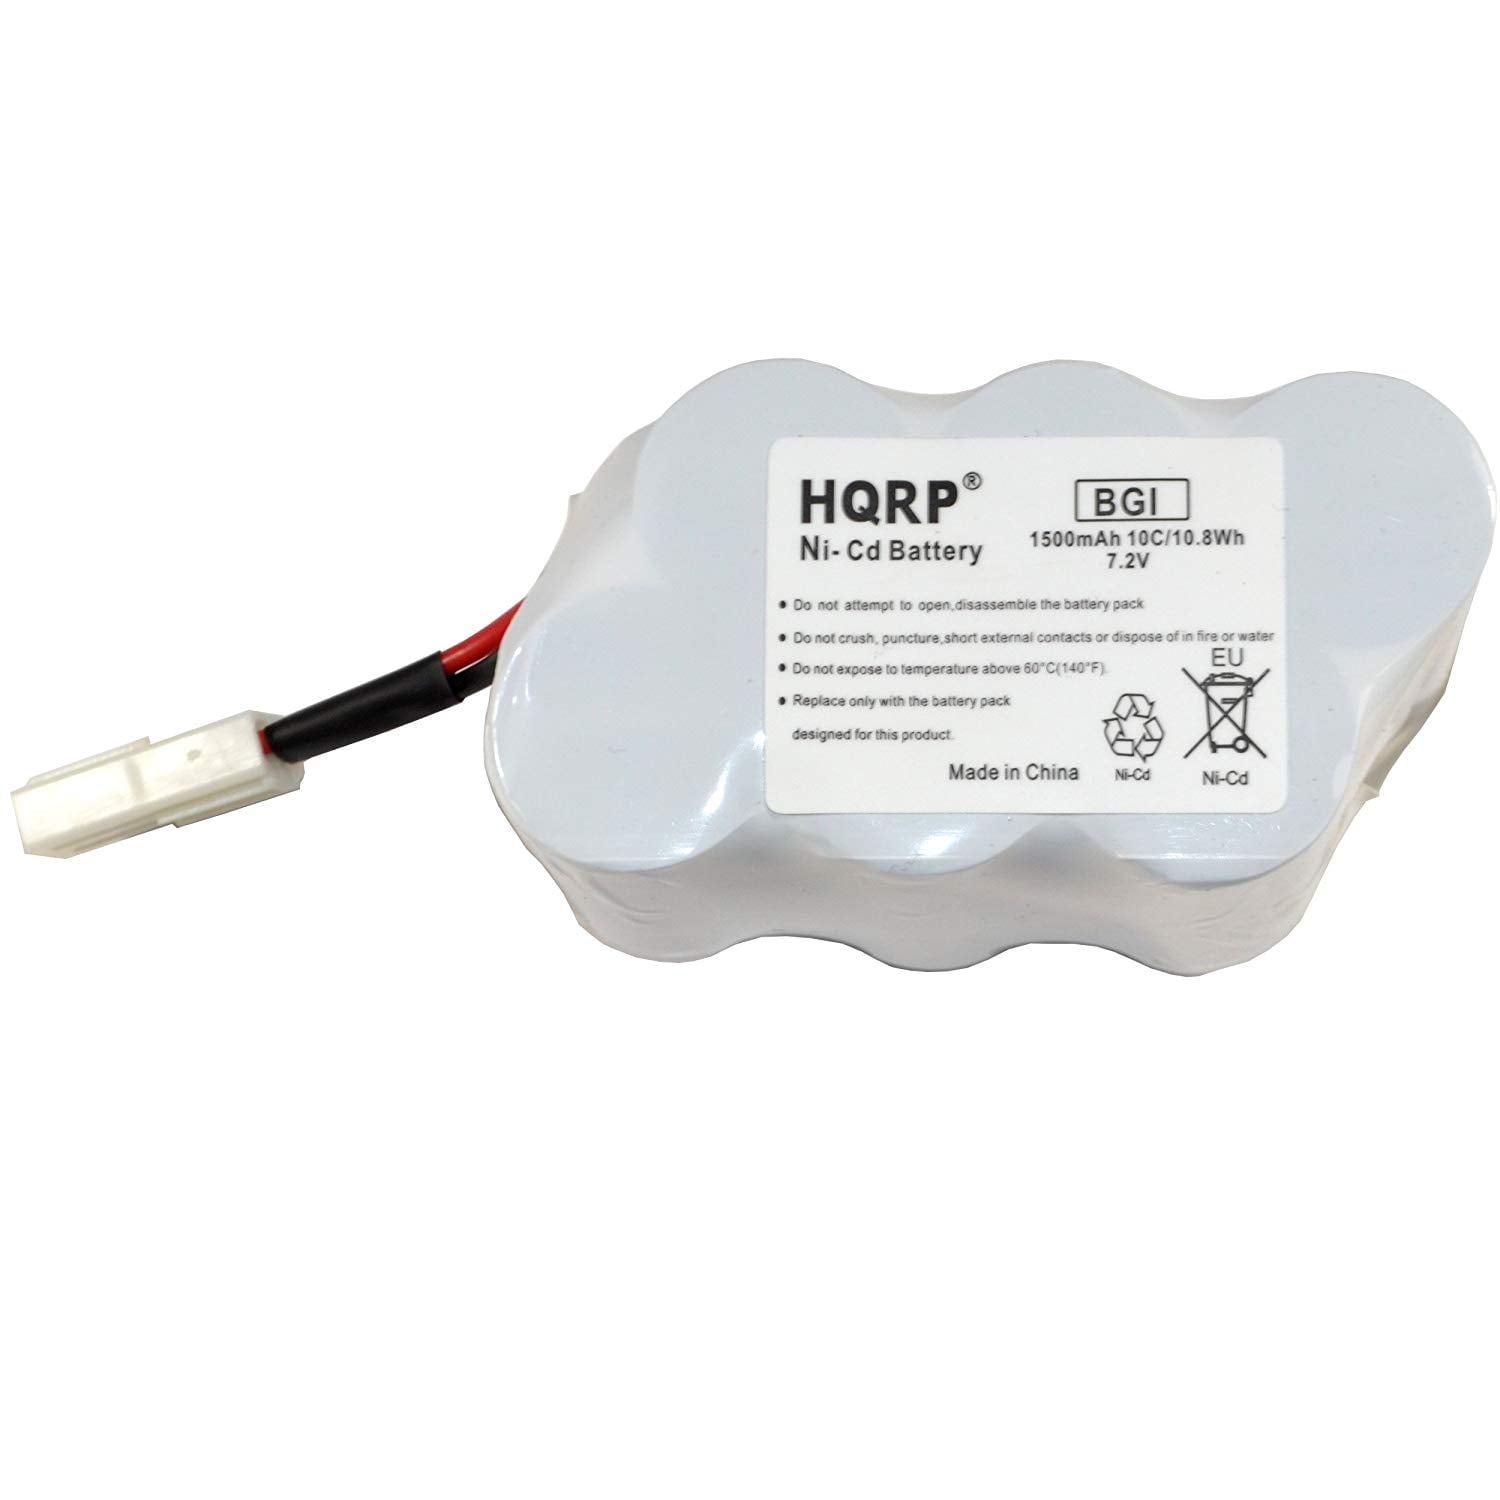 HQRP Battery fits Bissell 2880 Series Perfect Sweep Turbo Carpet & Floor Sweeper